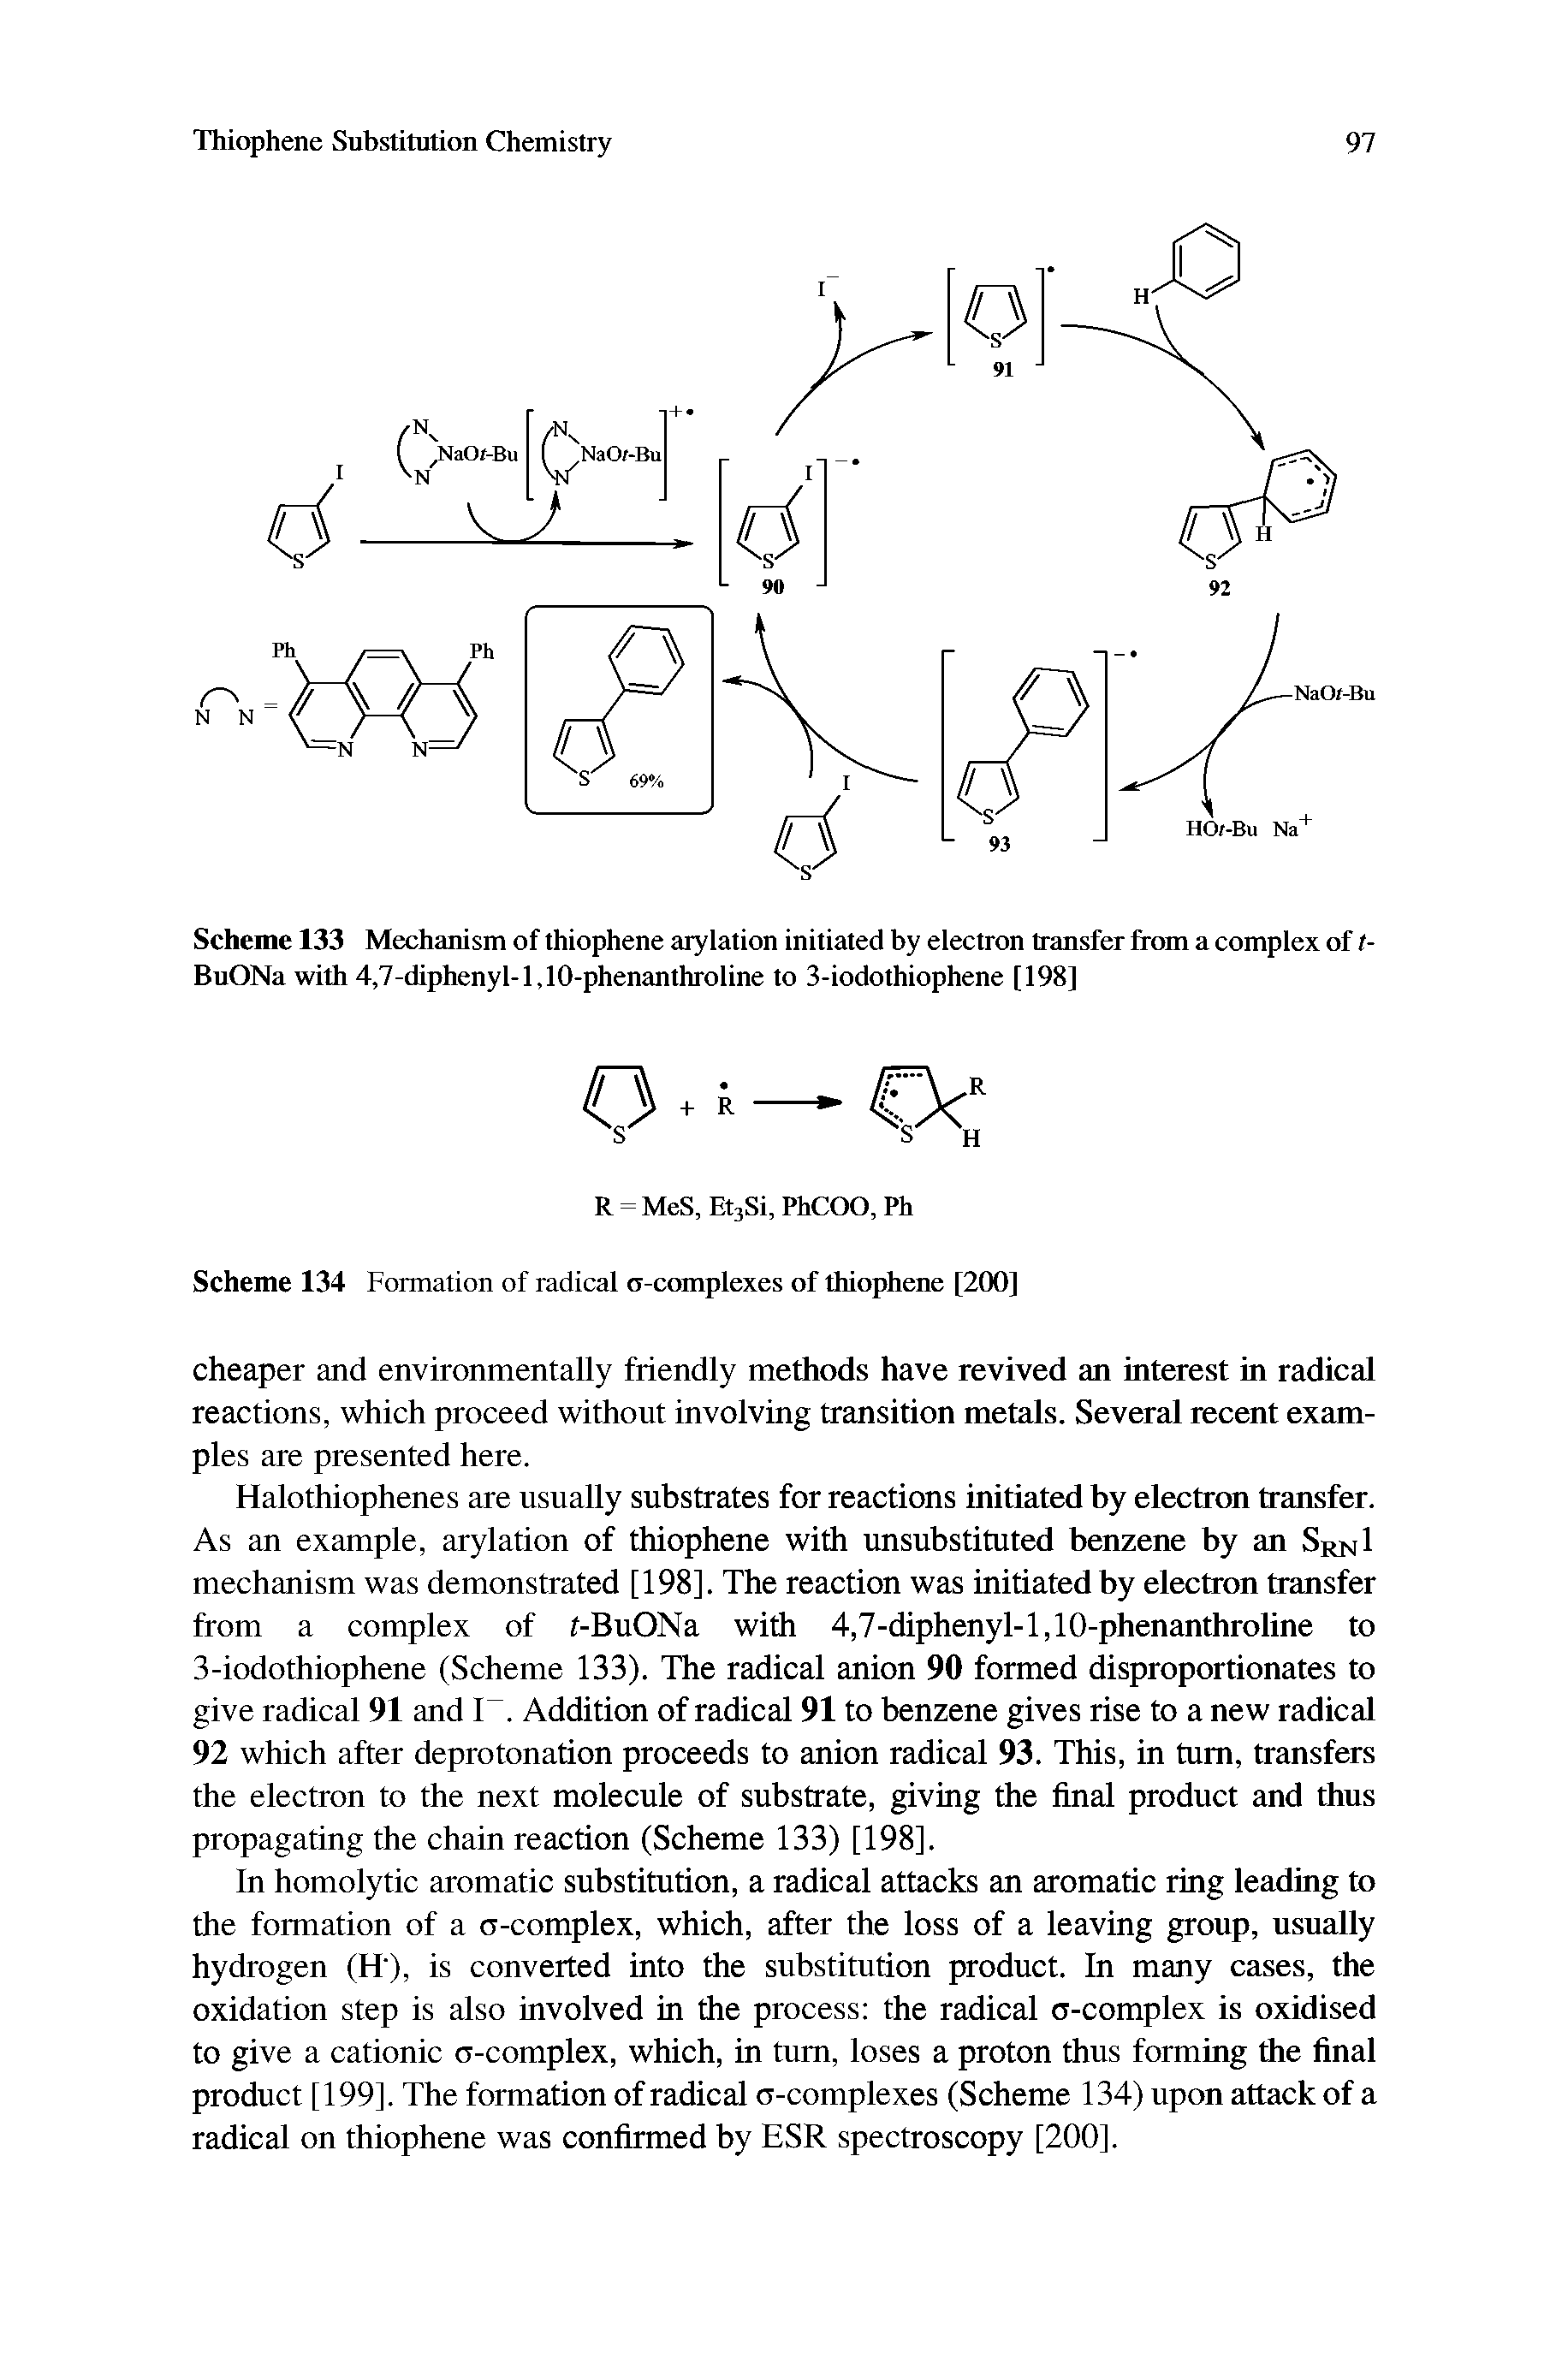 Scheme 133 Meehanism of thiophene arylation initiated by electron transfer frran a complex of t-BuONa with 4,7-diphenyl-1,10-phenanthroline to 3-iodothiophene [198]...